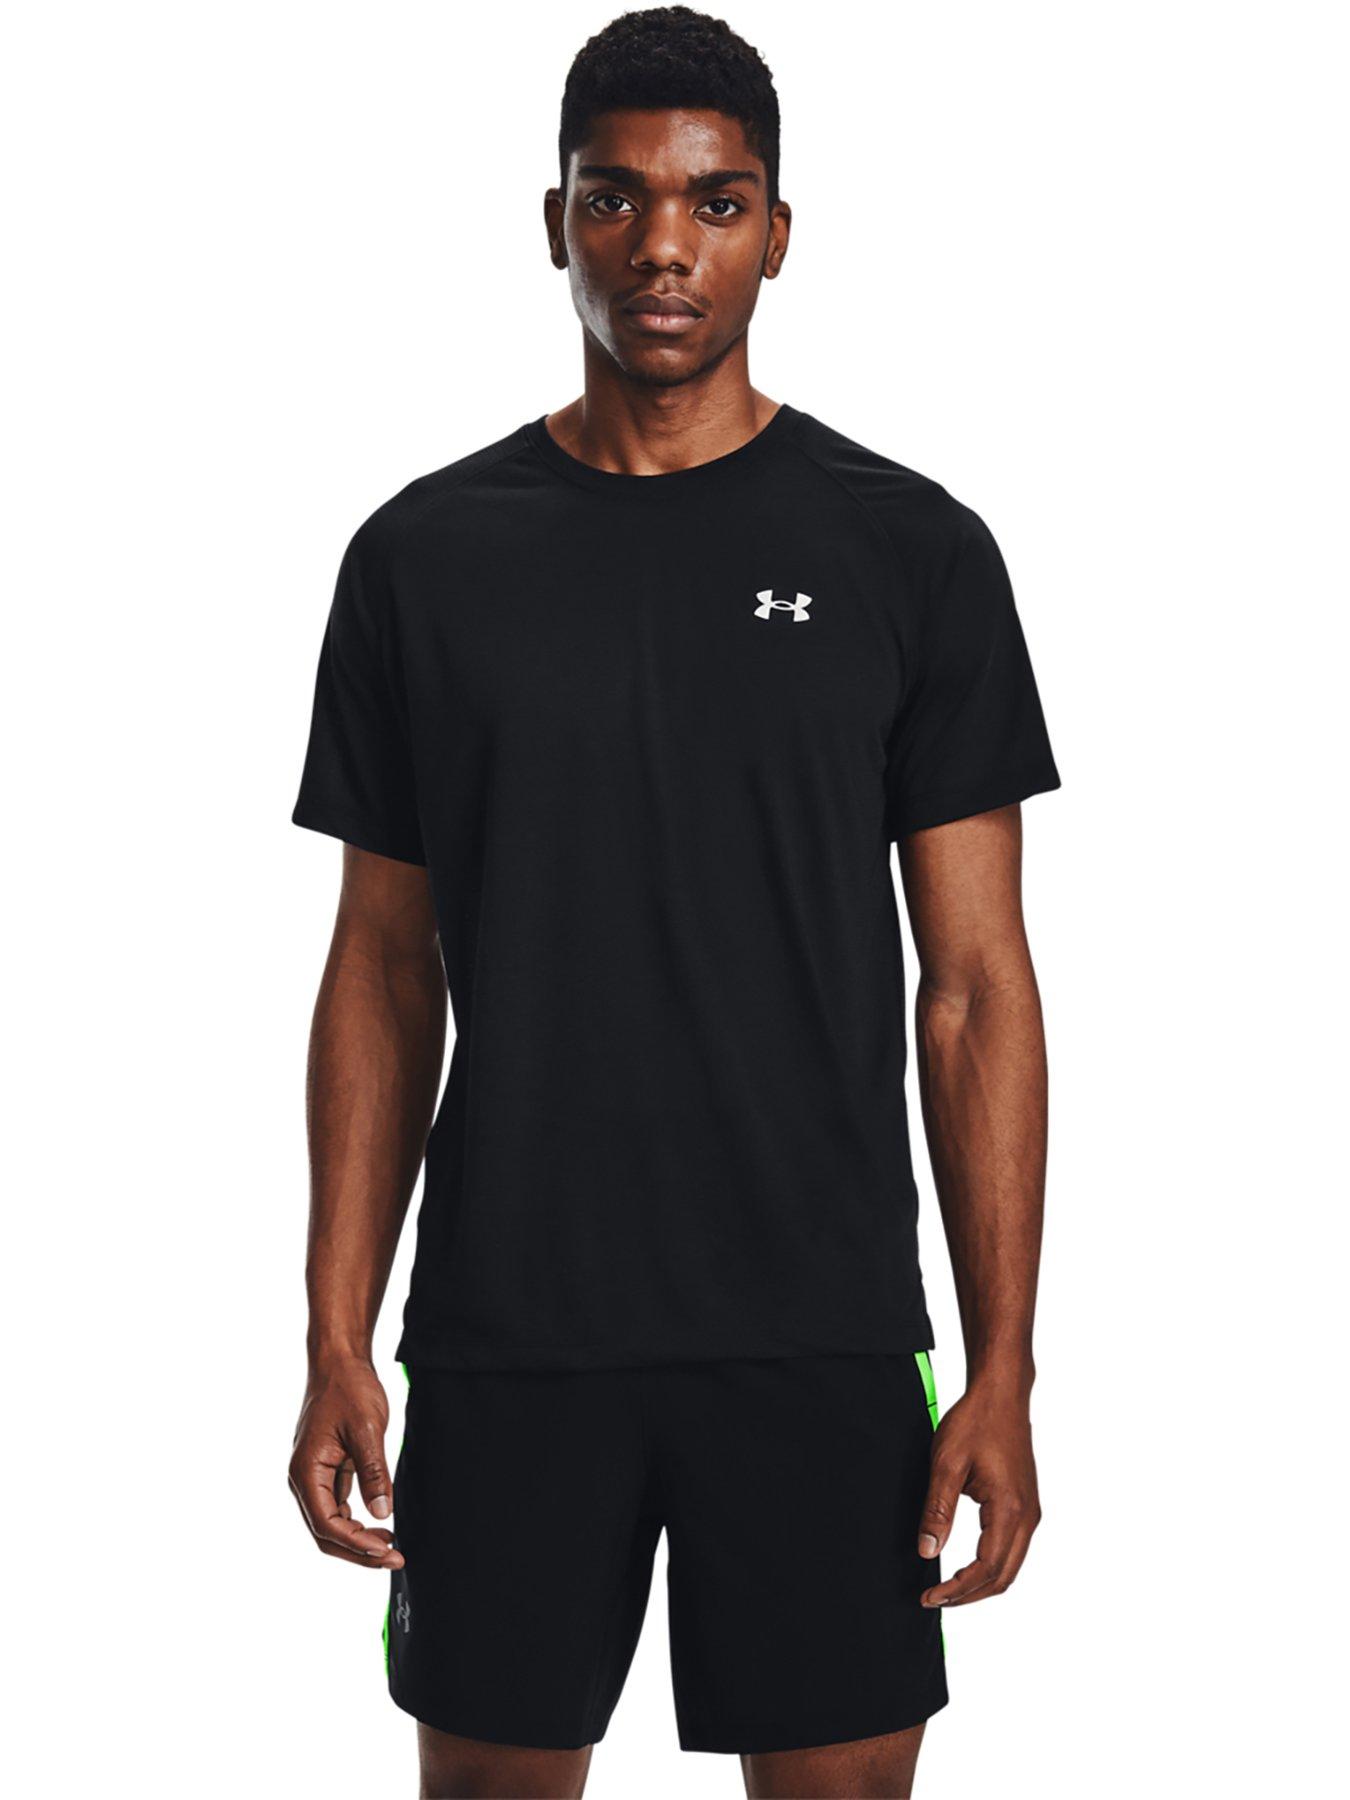 llenar montar consultor Men's UNDER ARMOUR T-Shirts, Tops & Polo Shirts | Very.co.uk